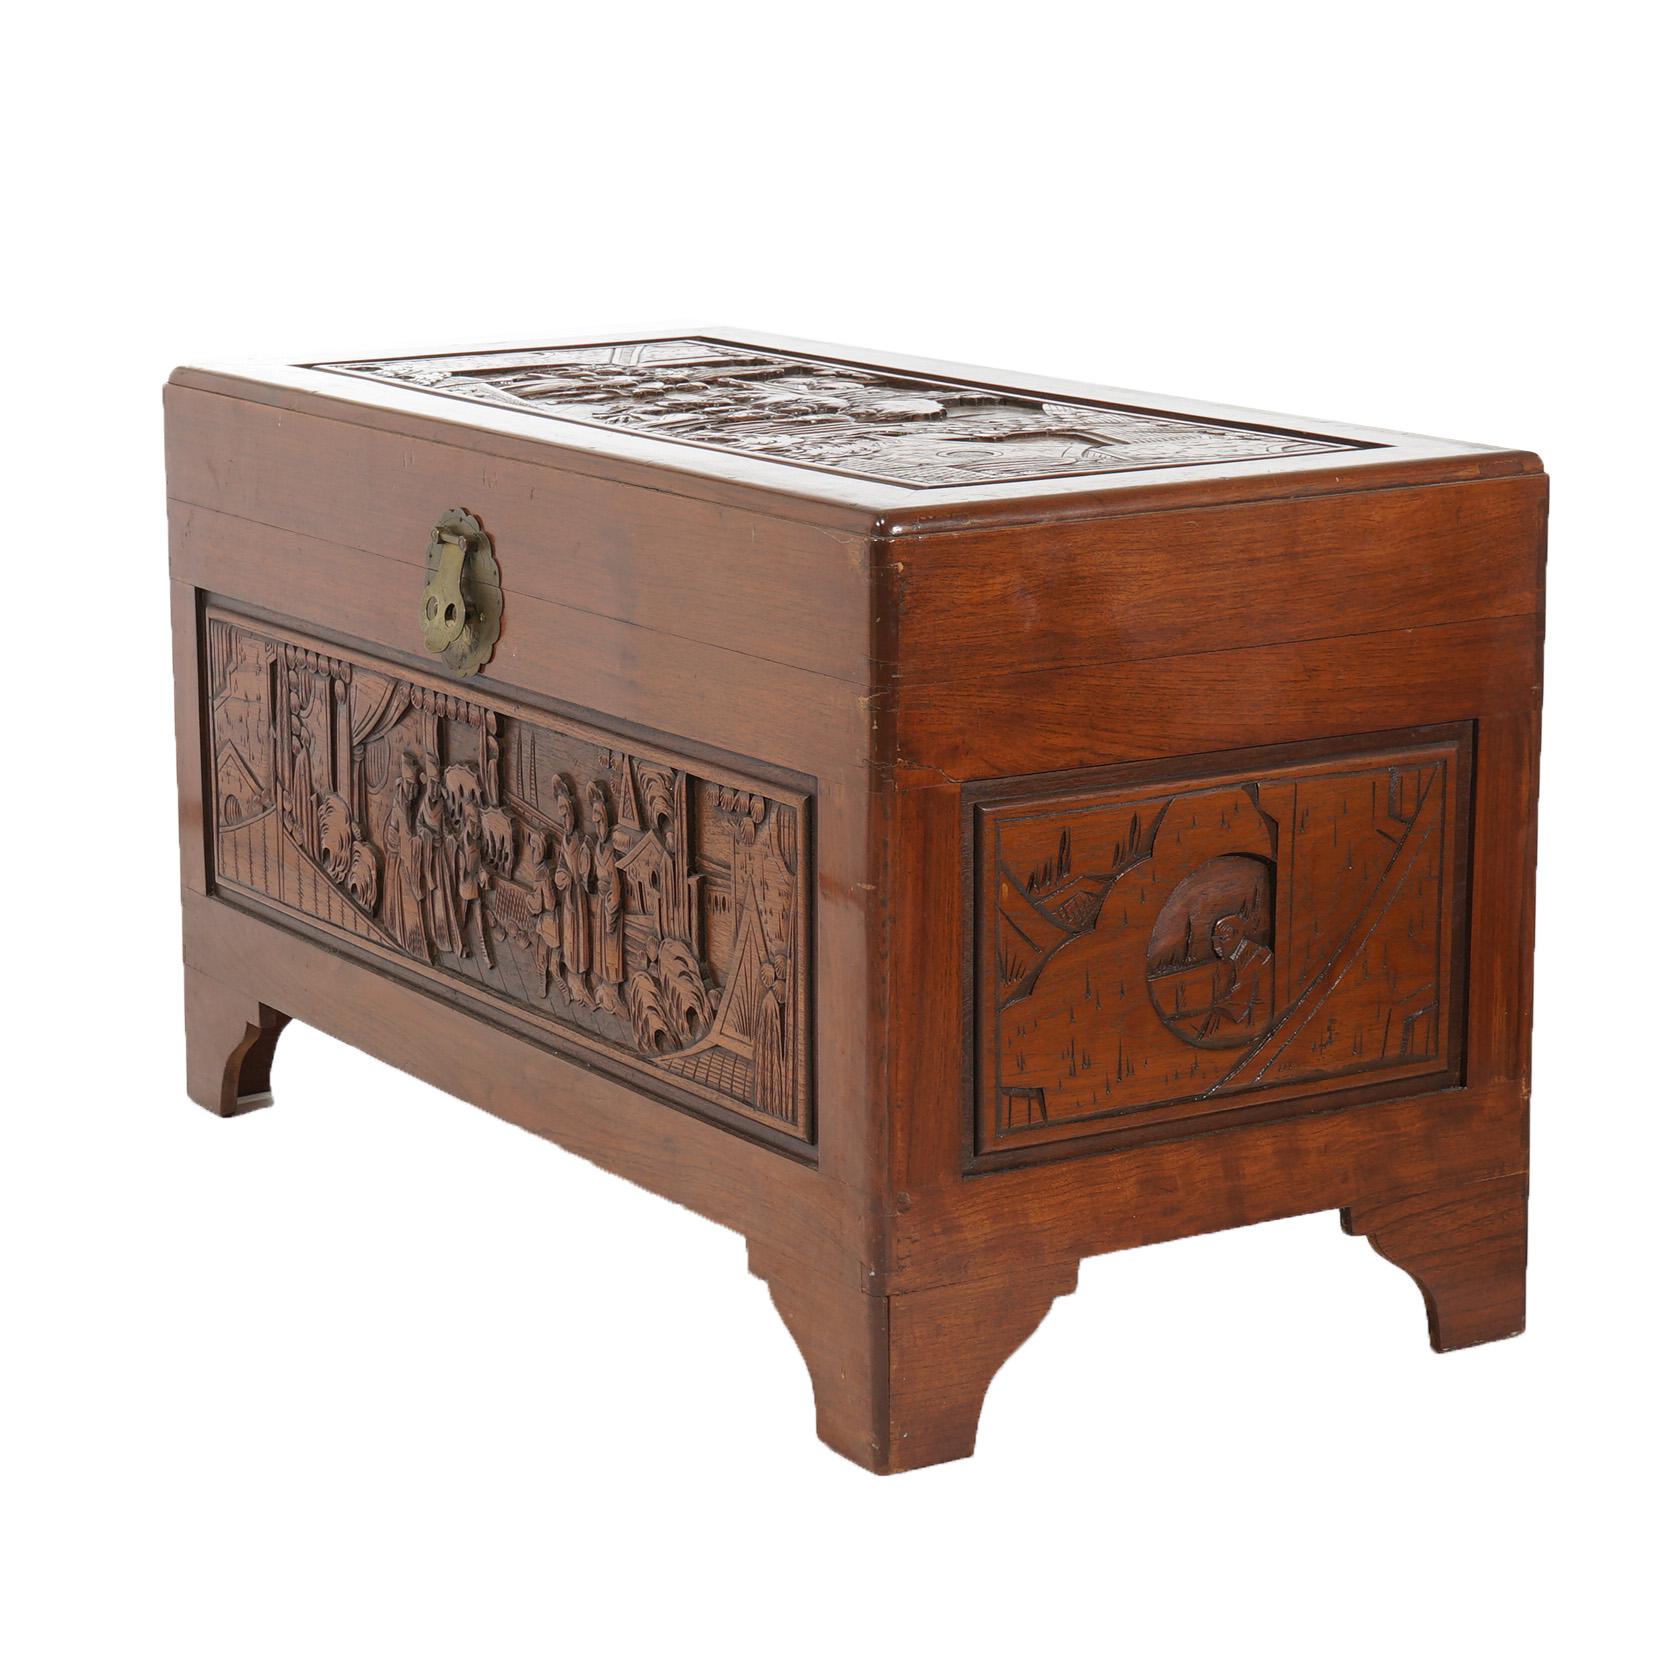 Chinese Carved Hardwood Figural Blanket Chest with Street Scene in Relief 20thC For Sale 4